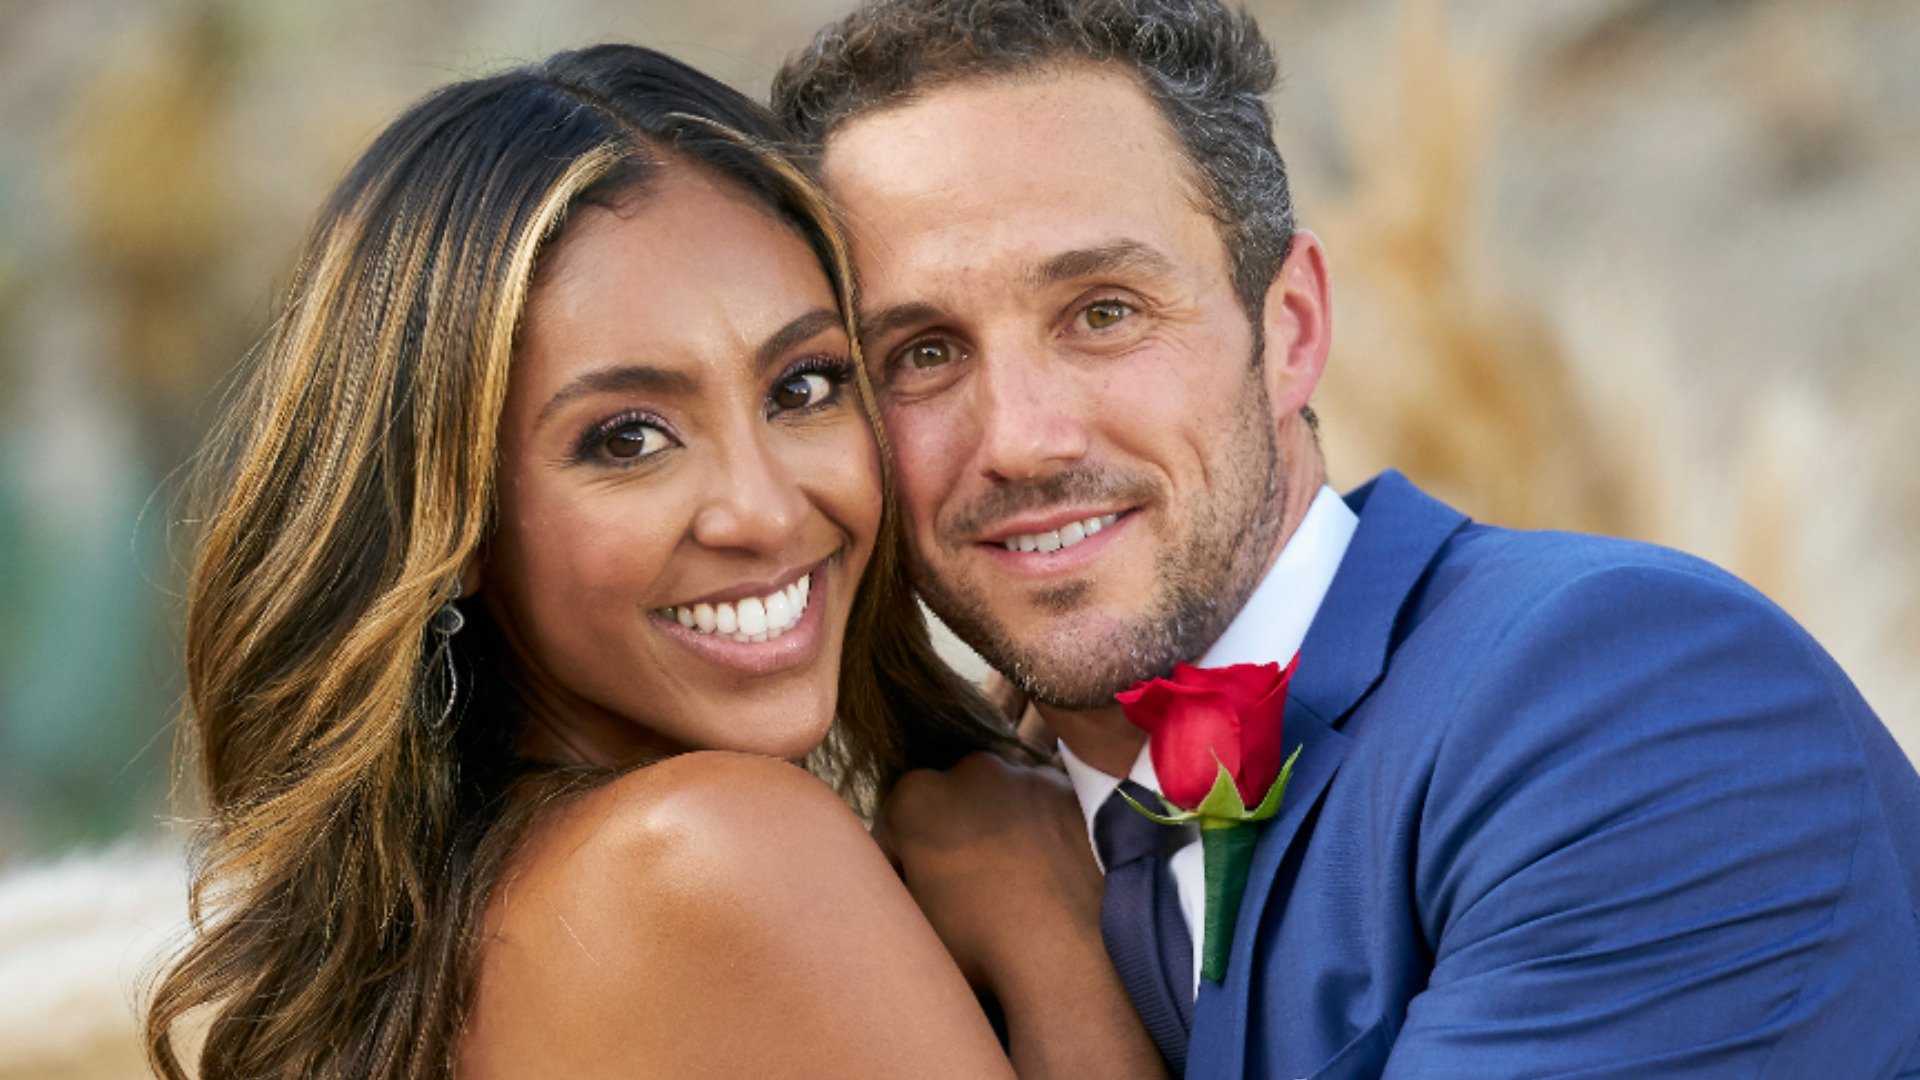 ‘The Bachelorette’: Tayshia Adams Says Zac Clark Breakup Announcement During ‘Men Tell All’ Was ‘Very Heavy’